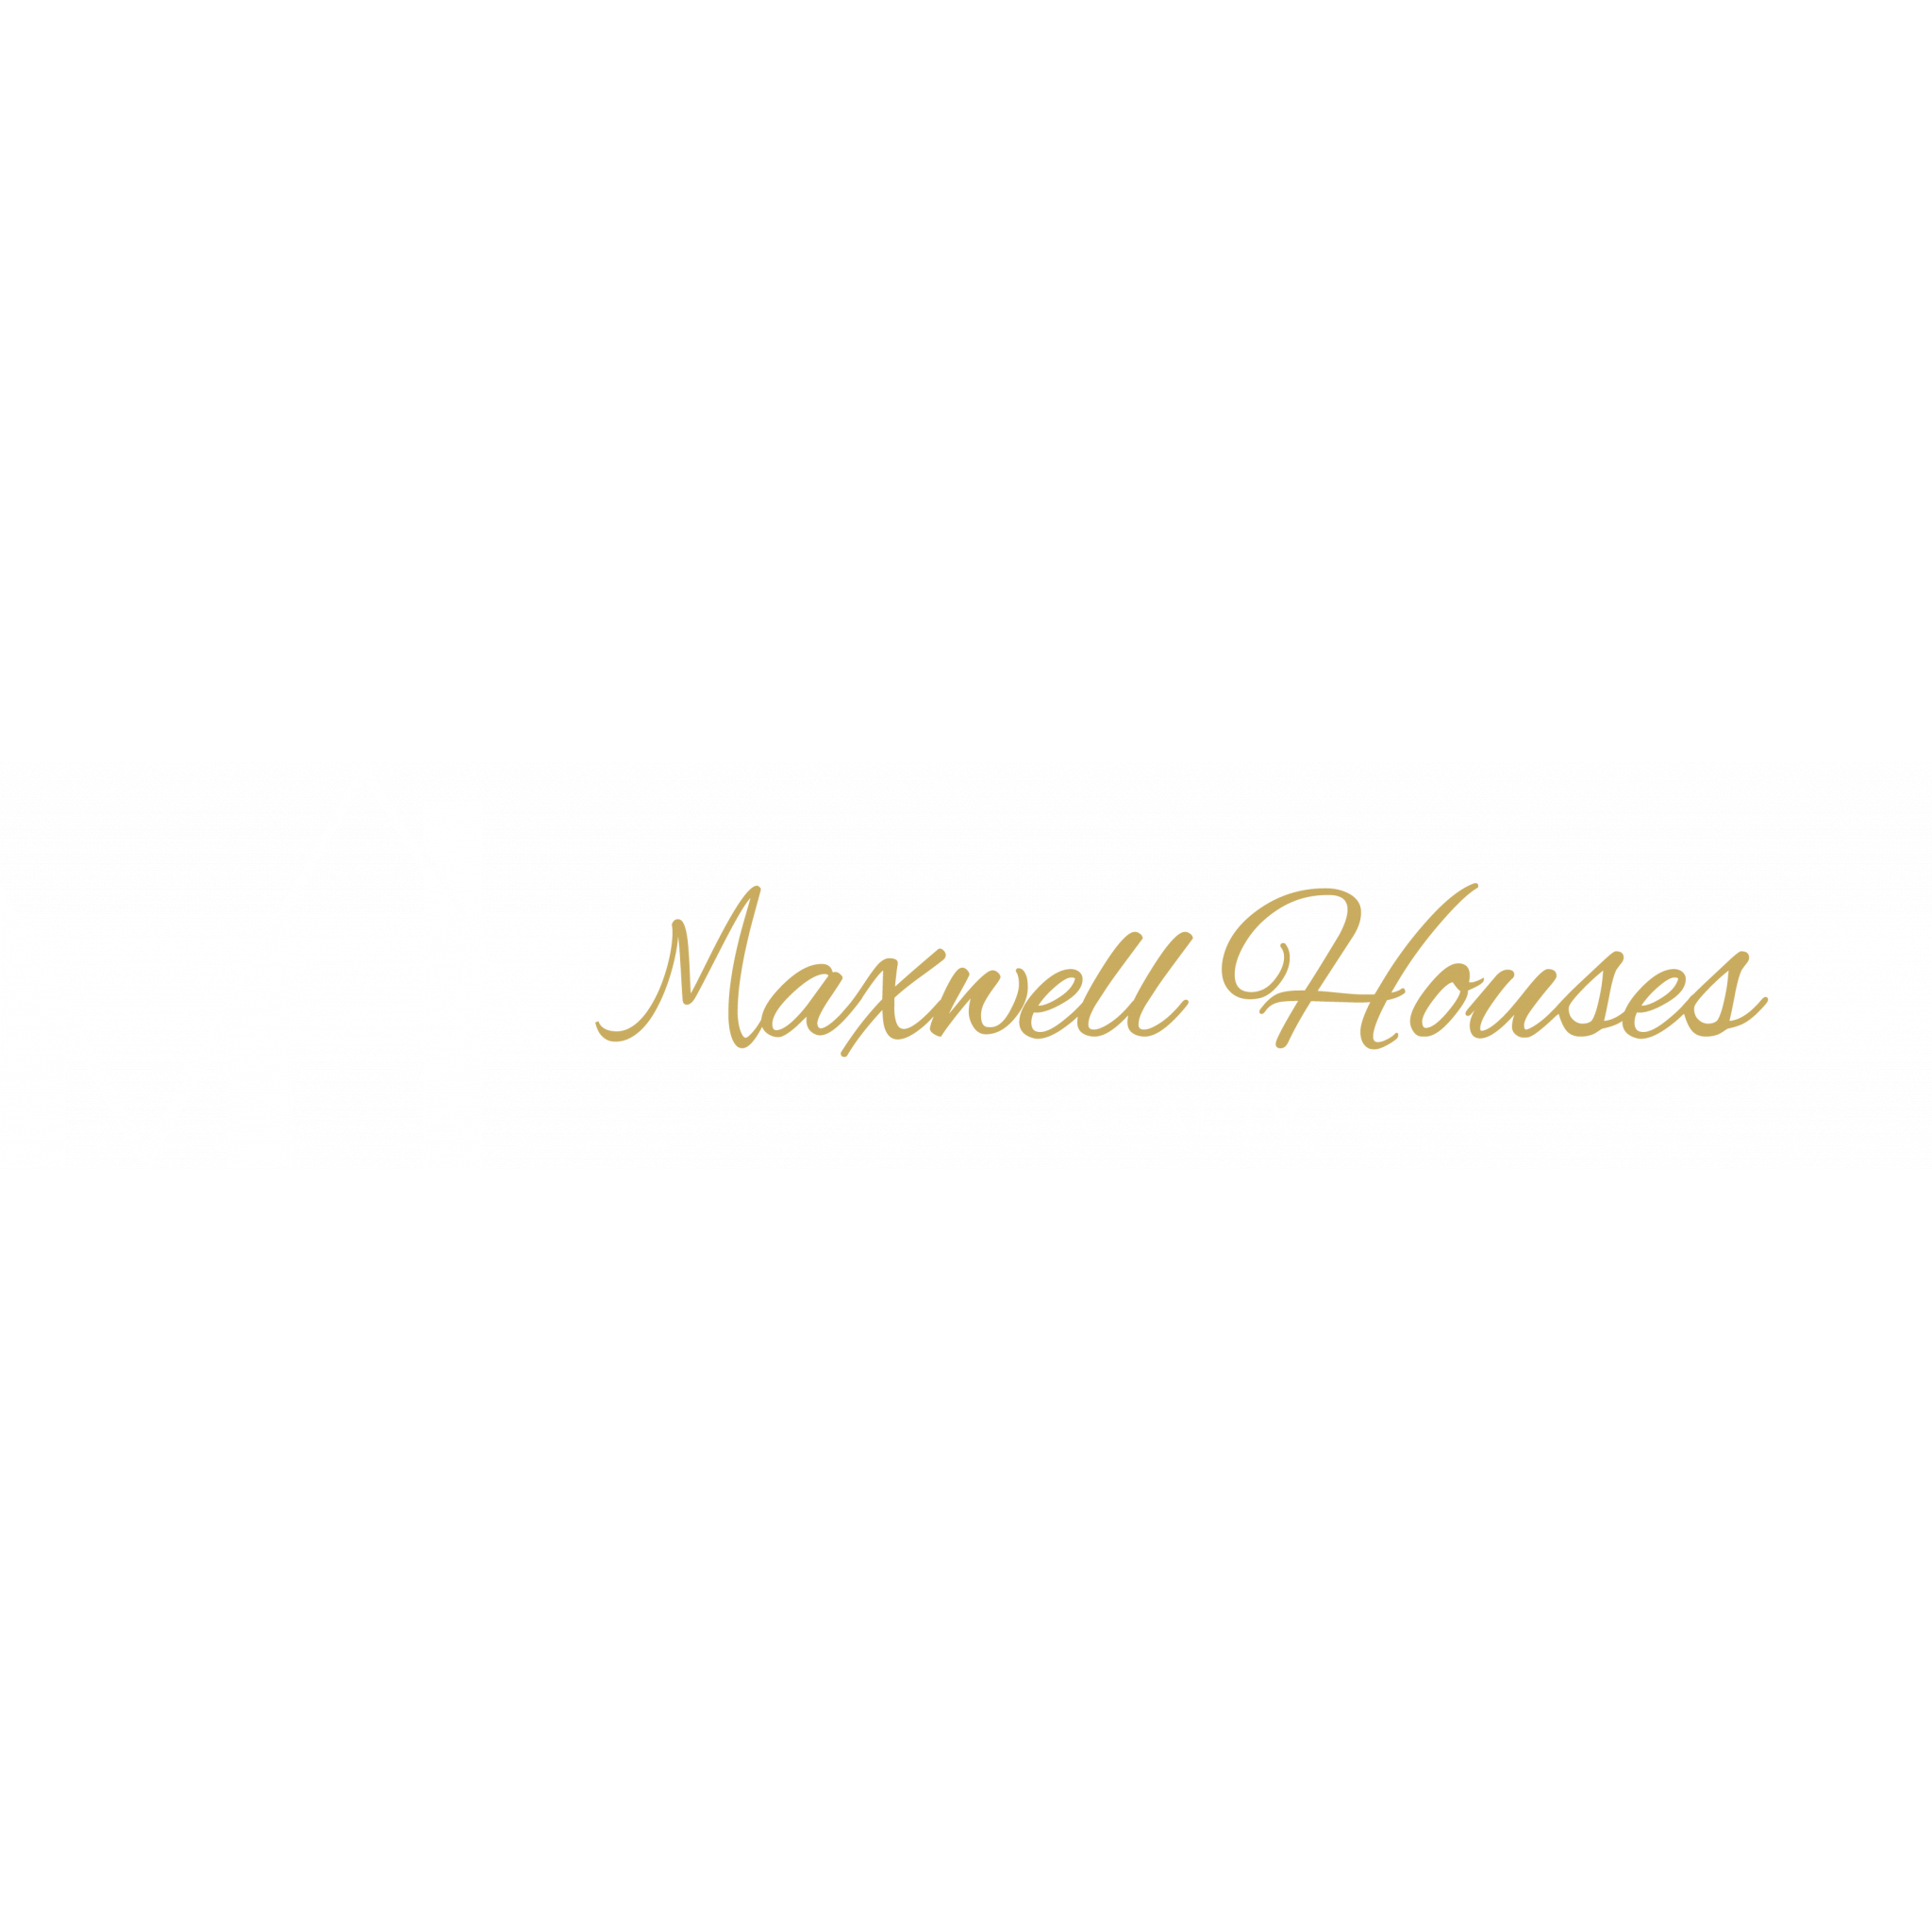 Realty One Group Eminence-Maxwell Houses Realty